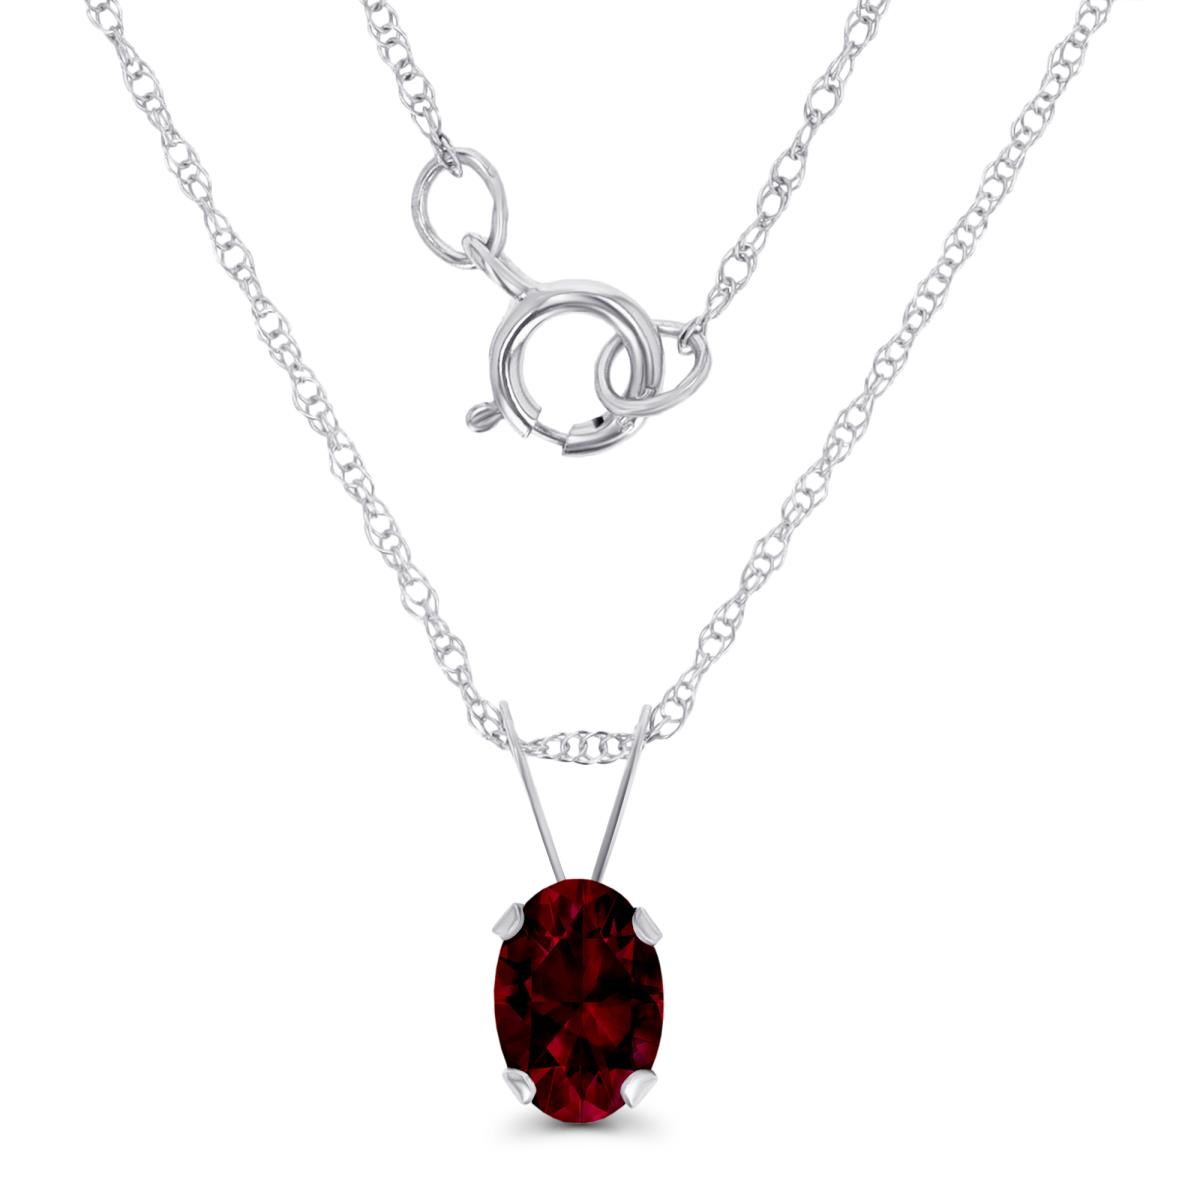 10K White Gold 6x4mm Oval Garnet 18" Rope Chain Necklace